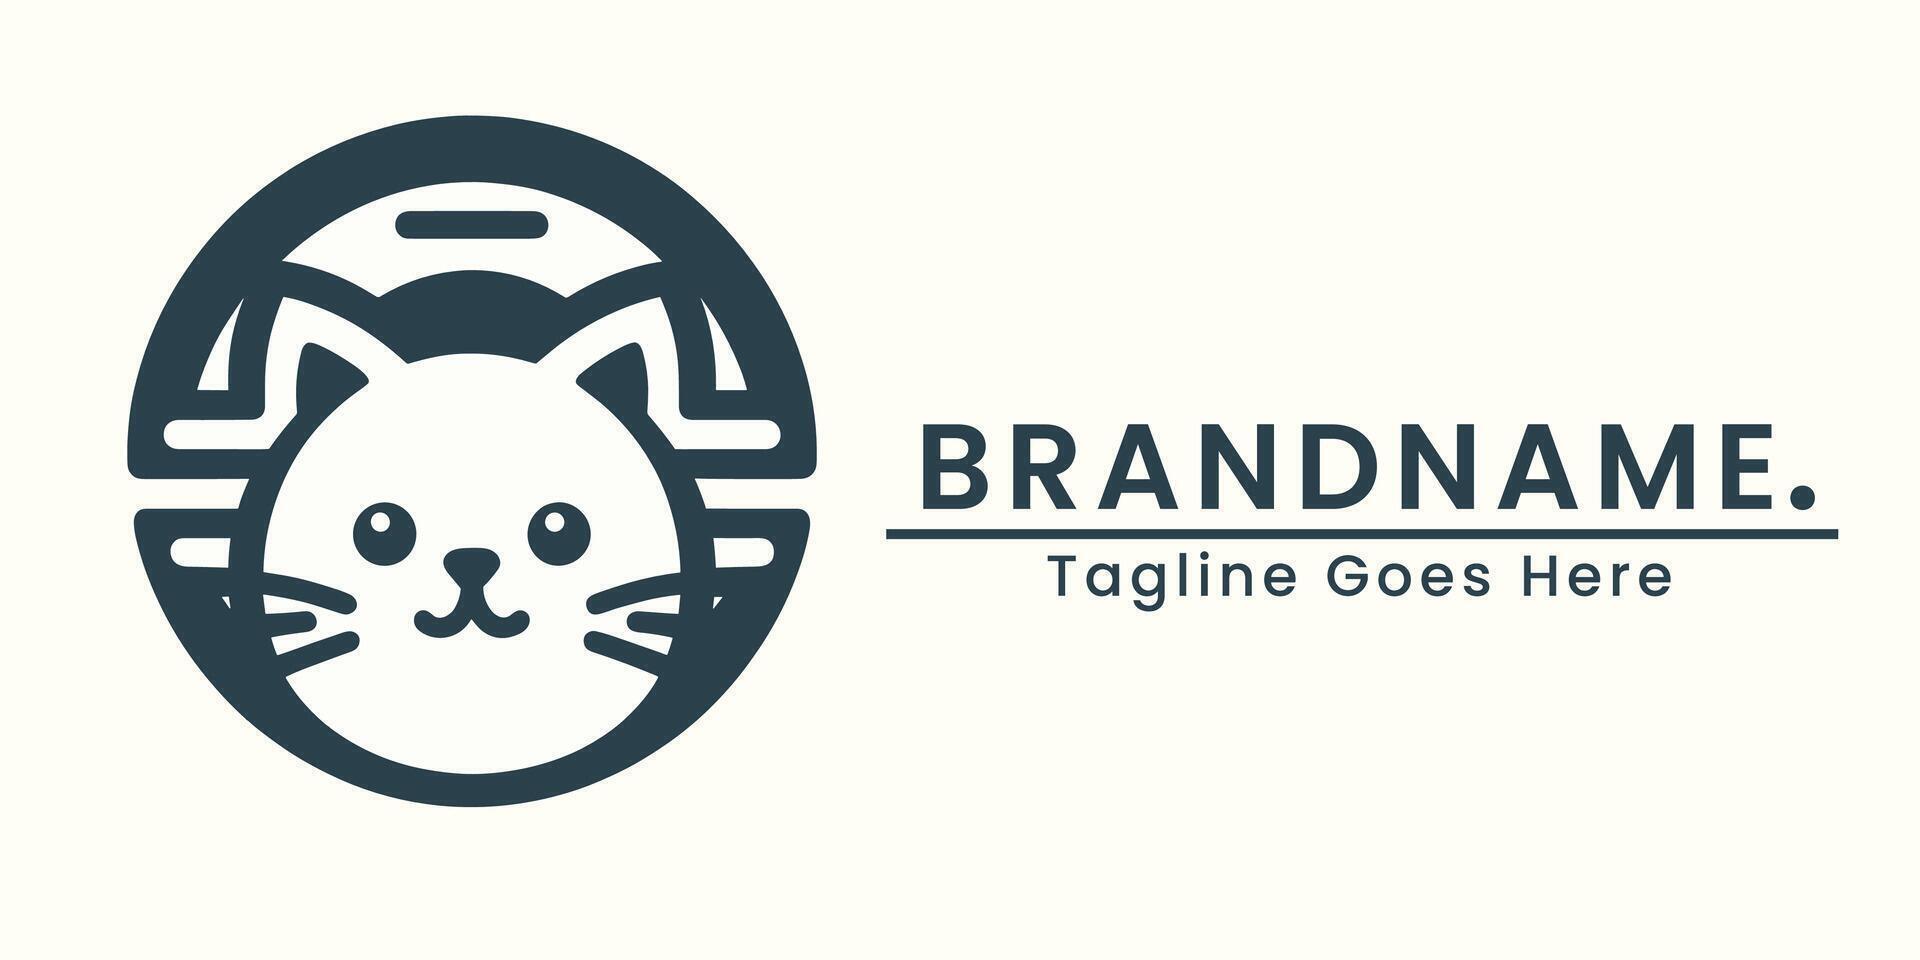 Kitten cute logo simple and flat Japanese style single color soft brown color logo for branding with circle pattern vector